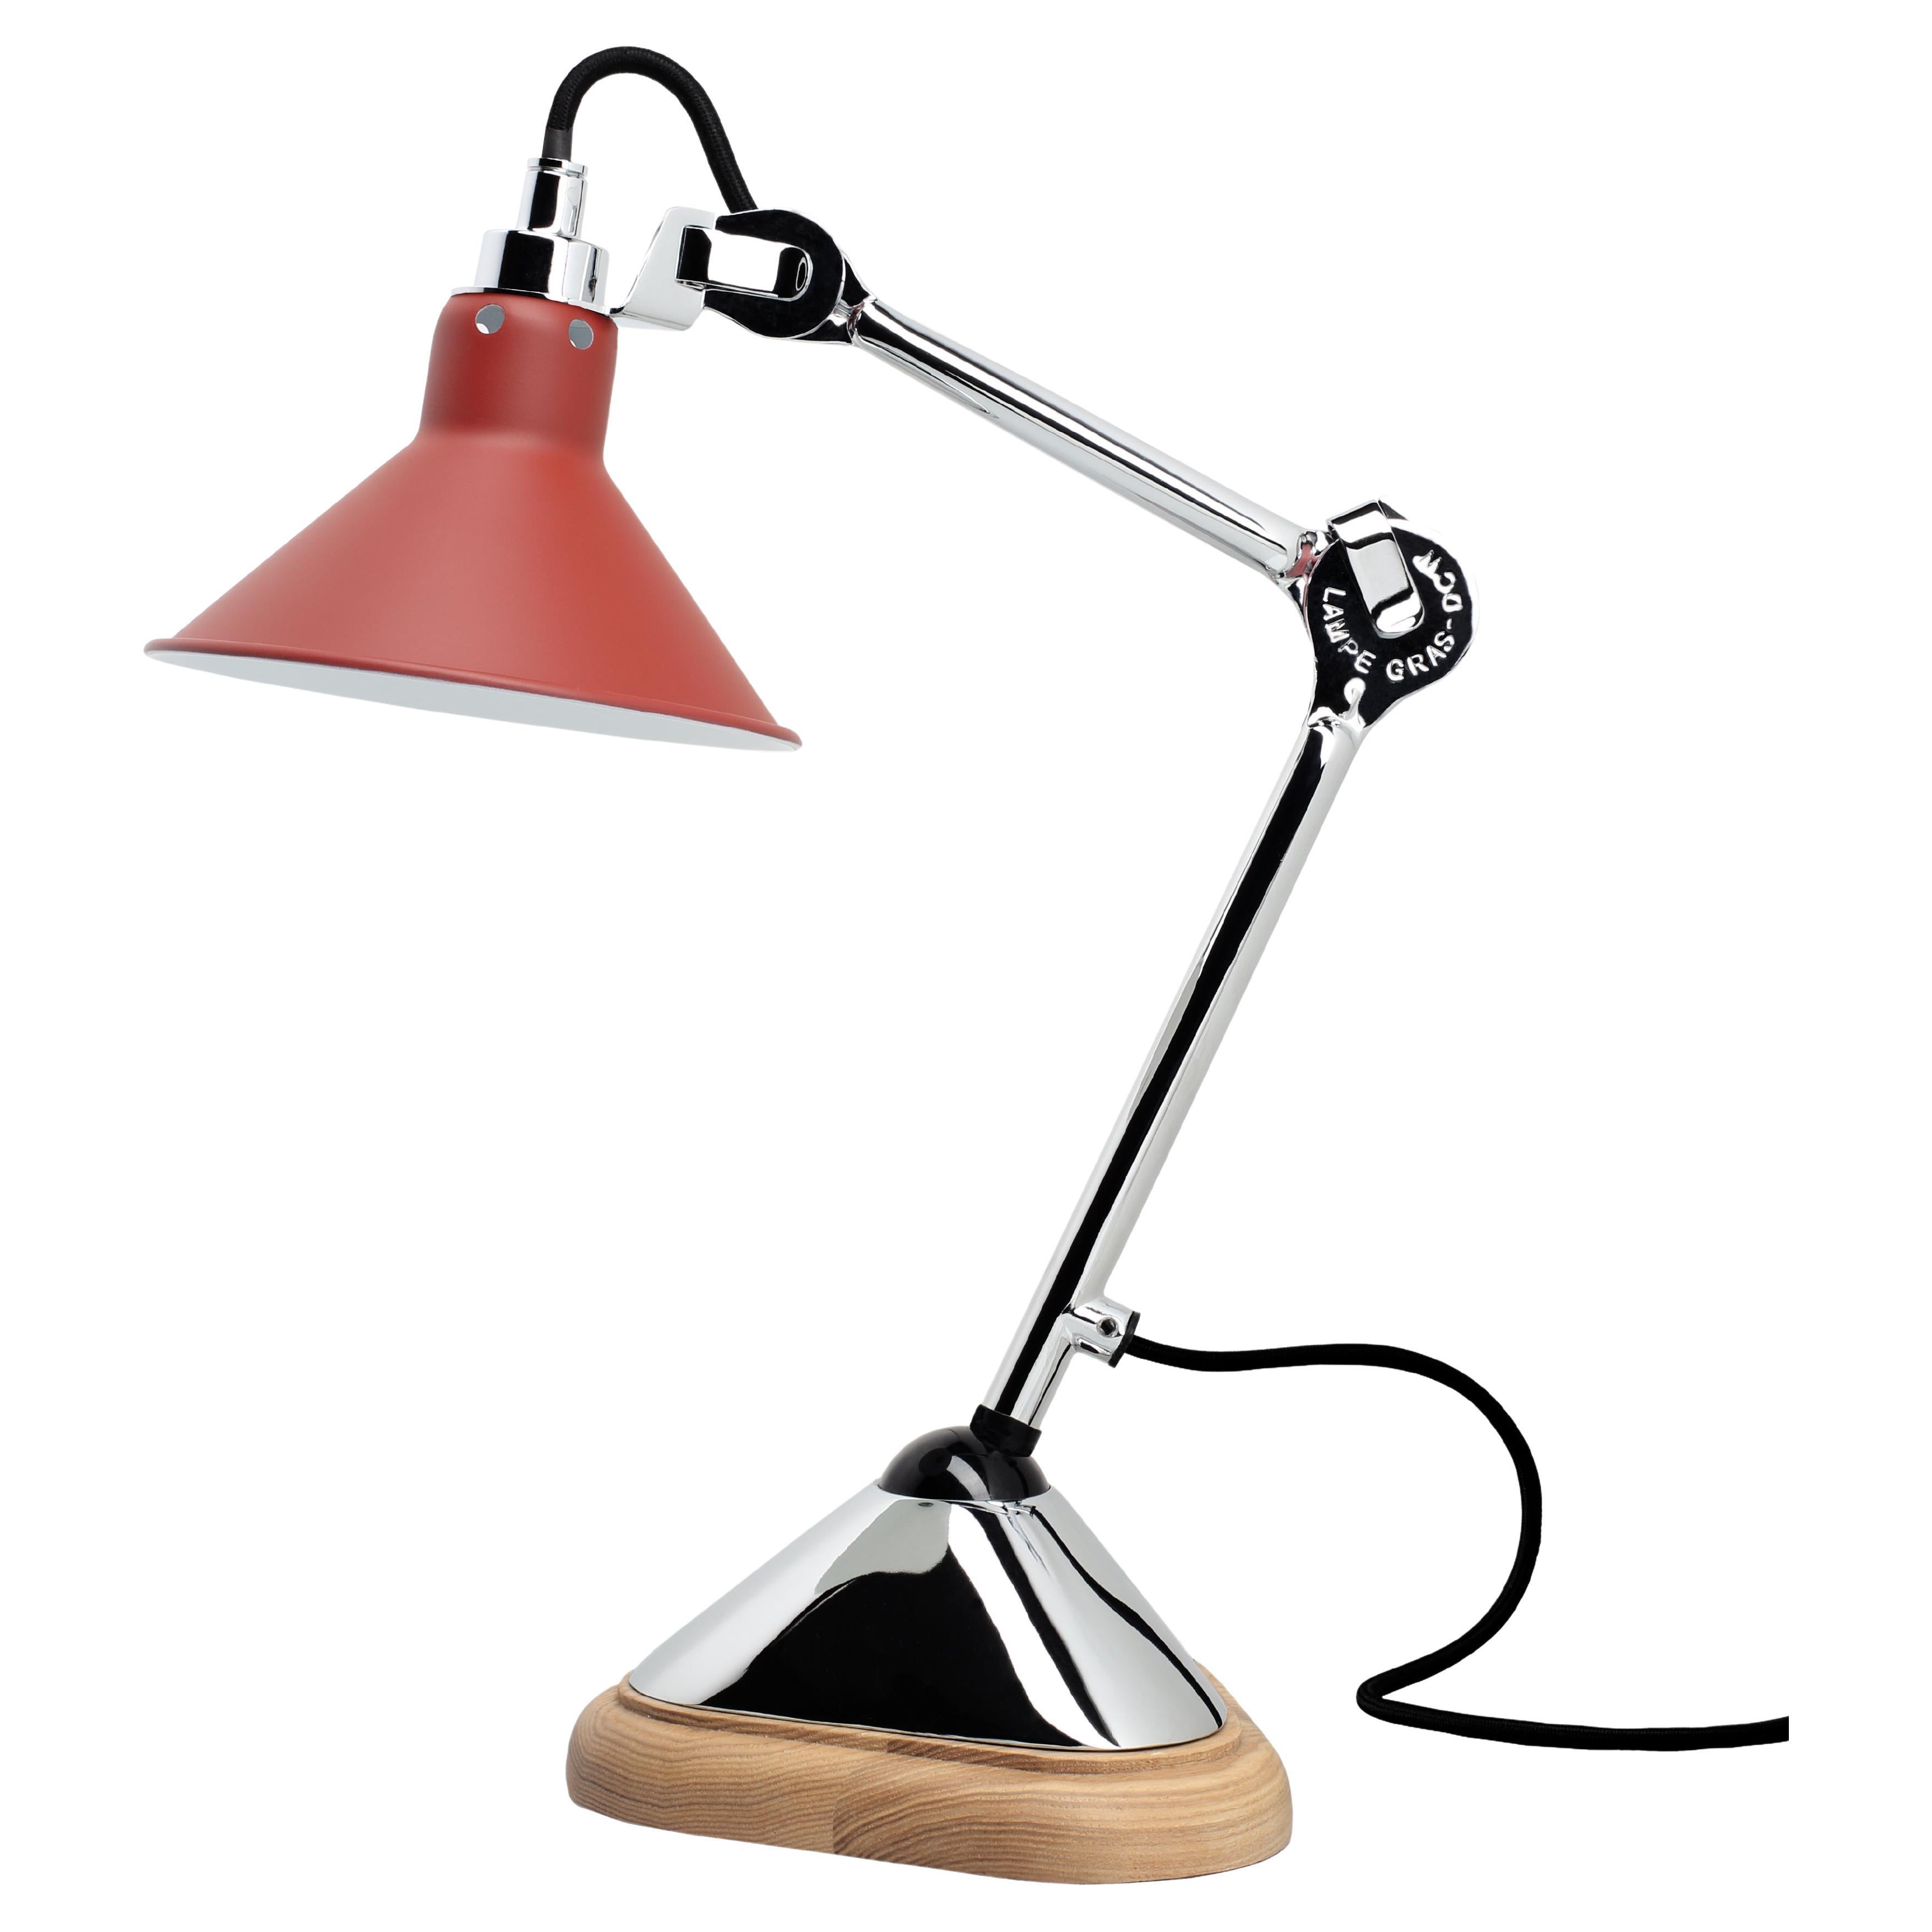 DCW Editions La Lampe Gras N°207 Conic Table Lamp in Chrome Arm with Red Shade For Sale